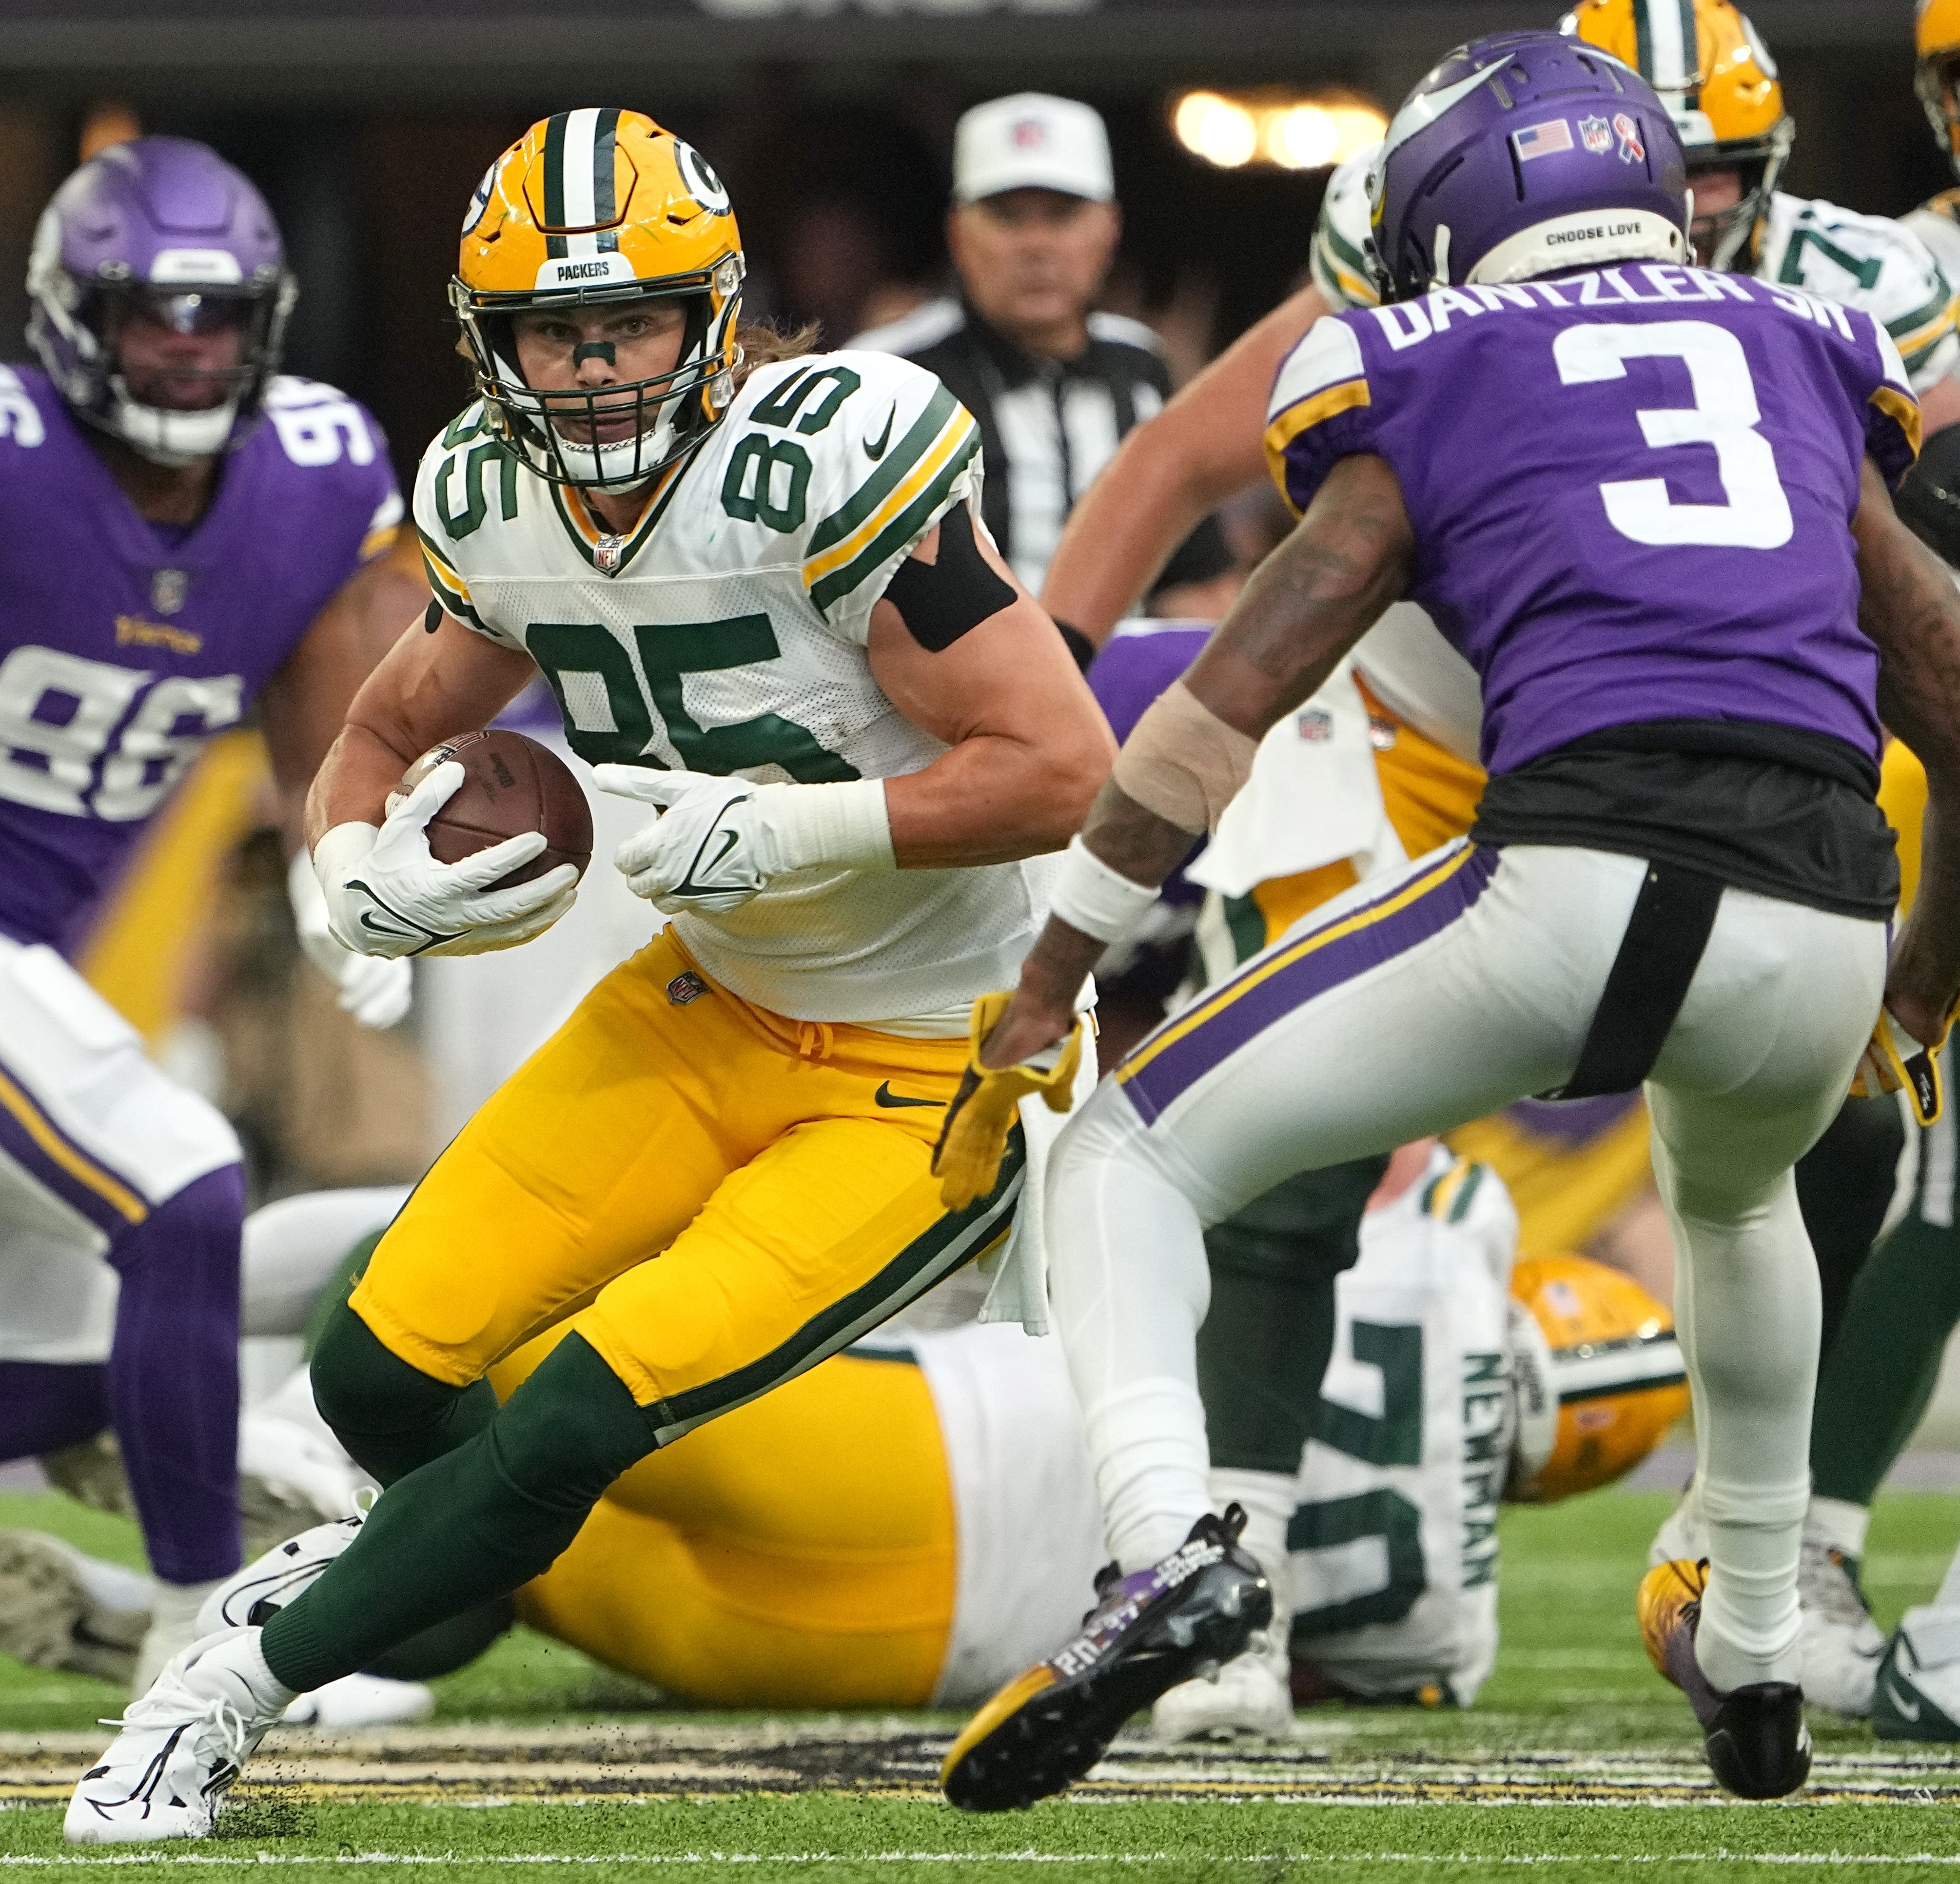 Former Packers tight end Robert Tonyan signs with the Minnesota Vikings, his fourth NFC North team in career